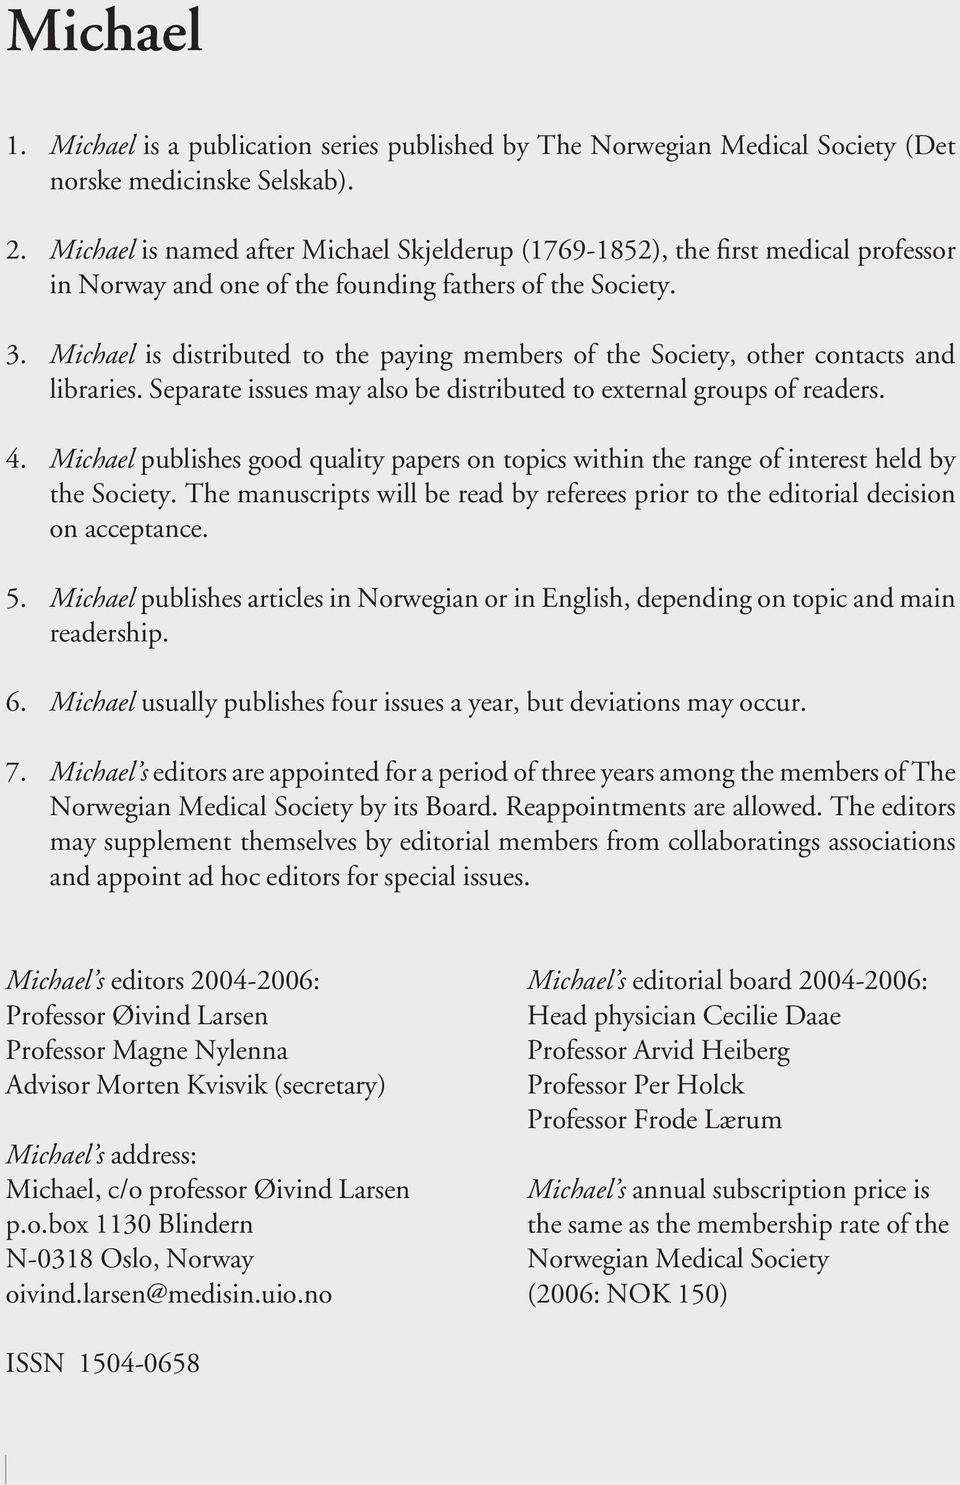 Michael is distributed to the paying members of the Society, other contacts and libraries. Separate issues may also be distributed to external groups of readers. 4.